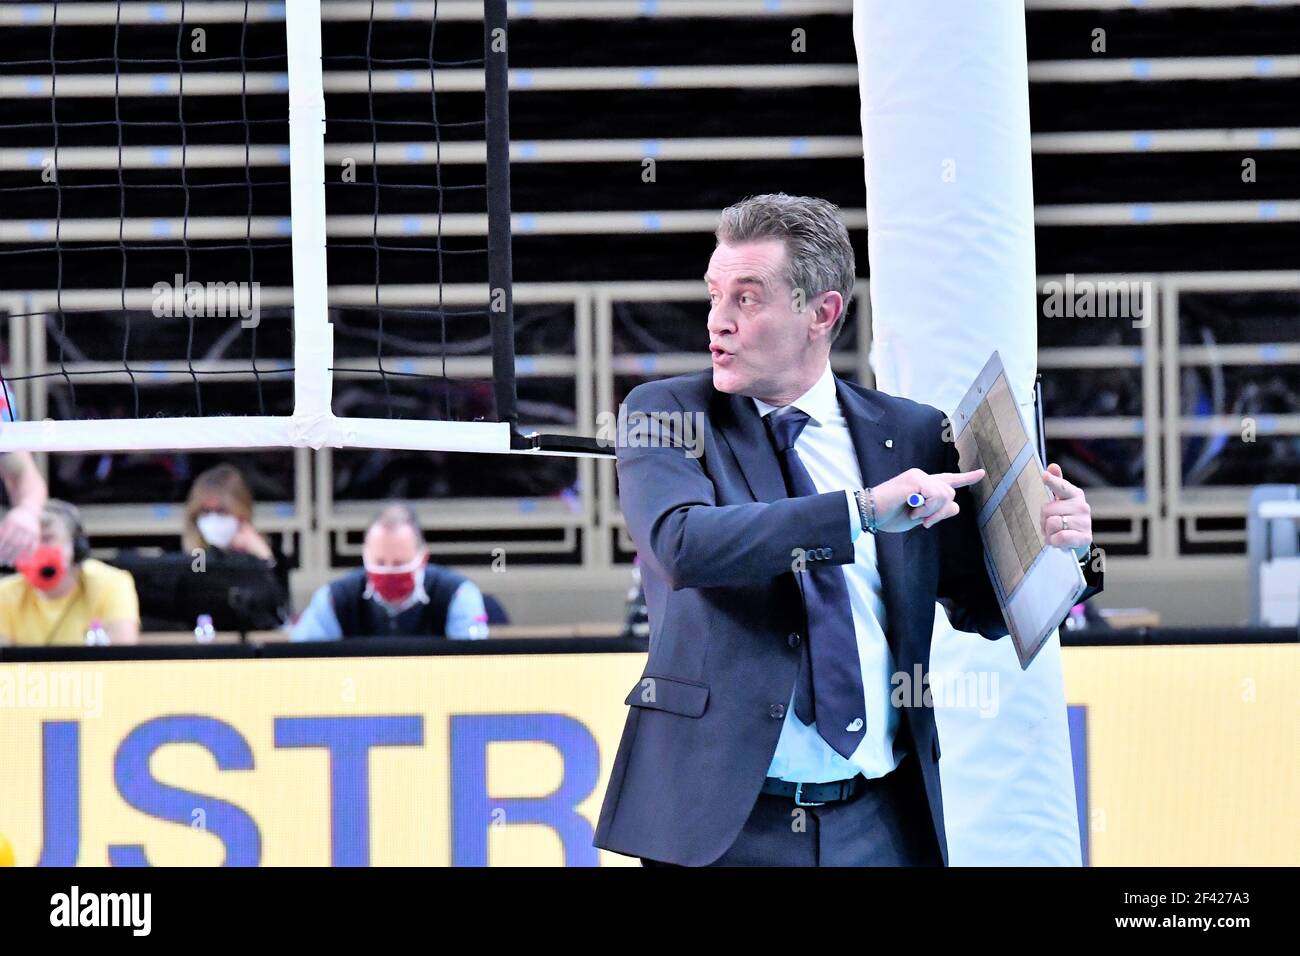 Trento, Italy. 18th Mar, 2021. Angelo Lorenzetti (Coach Itas Trentino) during Itas Trentino vs Sir Sicoma Monini Perugia, CEV Champions League volleyball match in Trento, Italy, March 18 2021 Credit: Independent Photo Agency/Alamy Live News Stock Photo